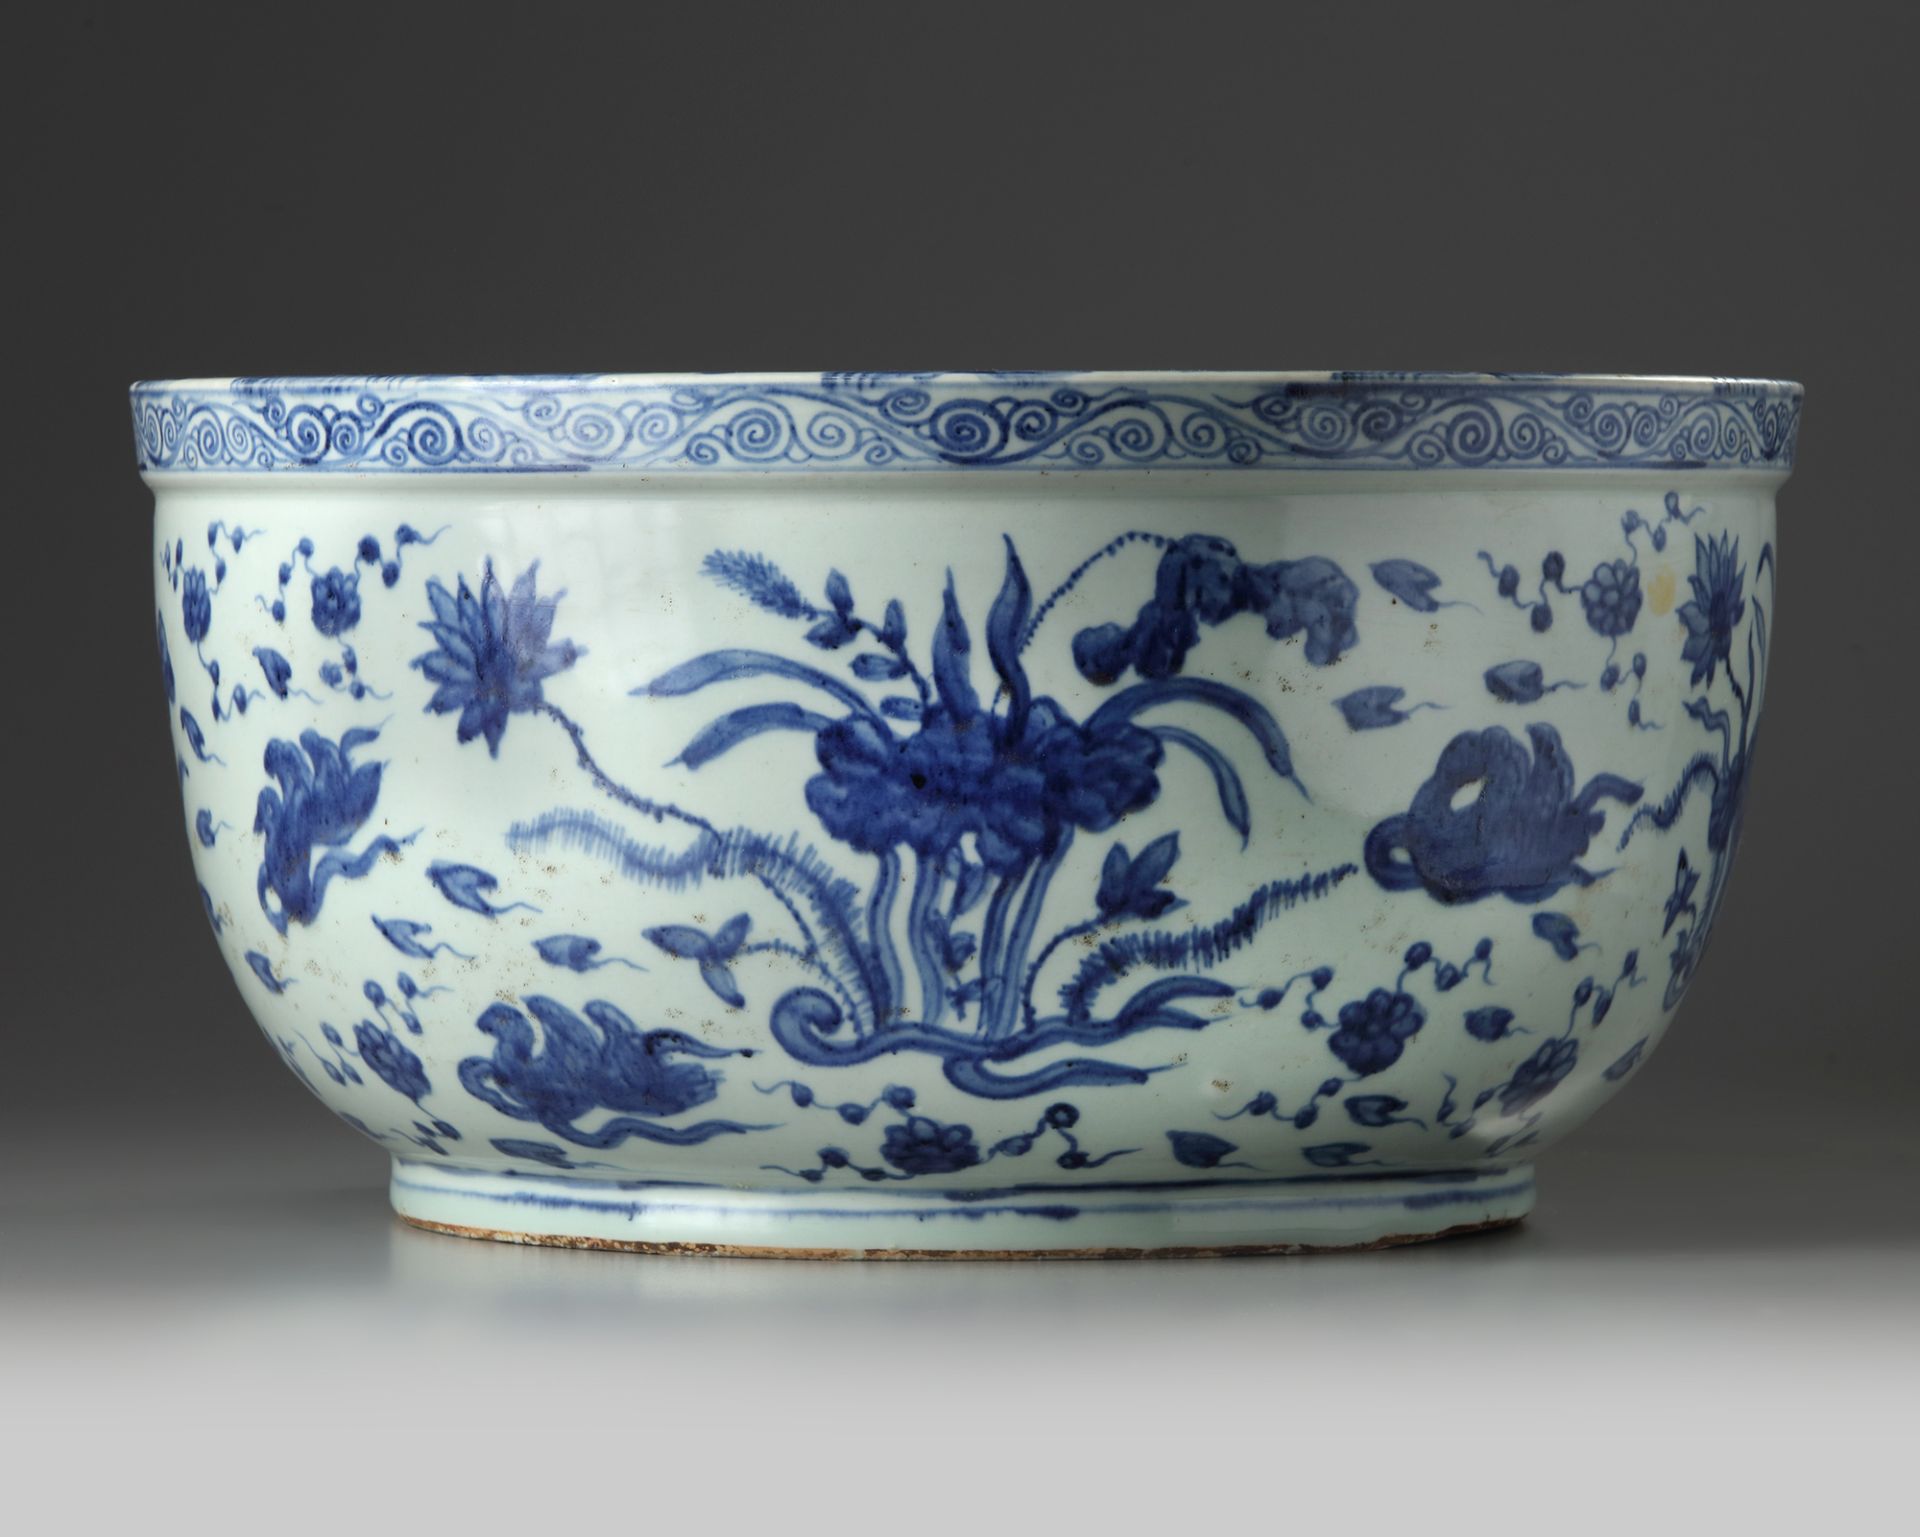 A CHINESE BLUE AND WHITE DUCKS AND LOTUS' BASIN, MING DYNASTY (1368-1644) - Image 2 of 6